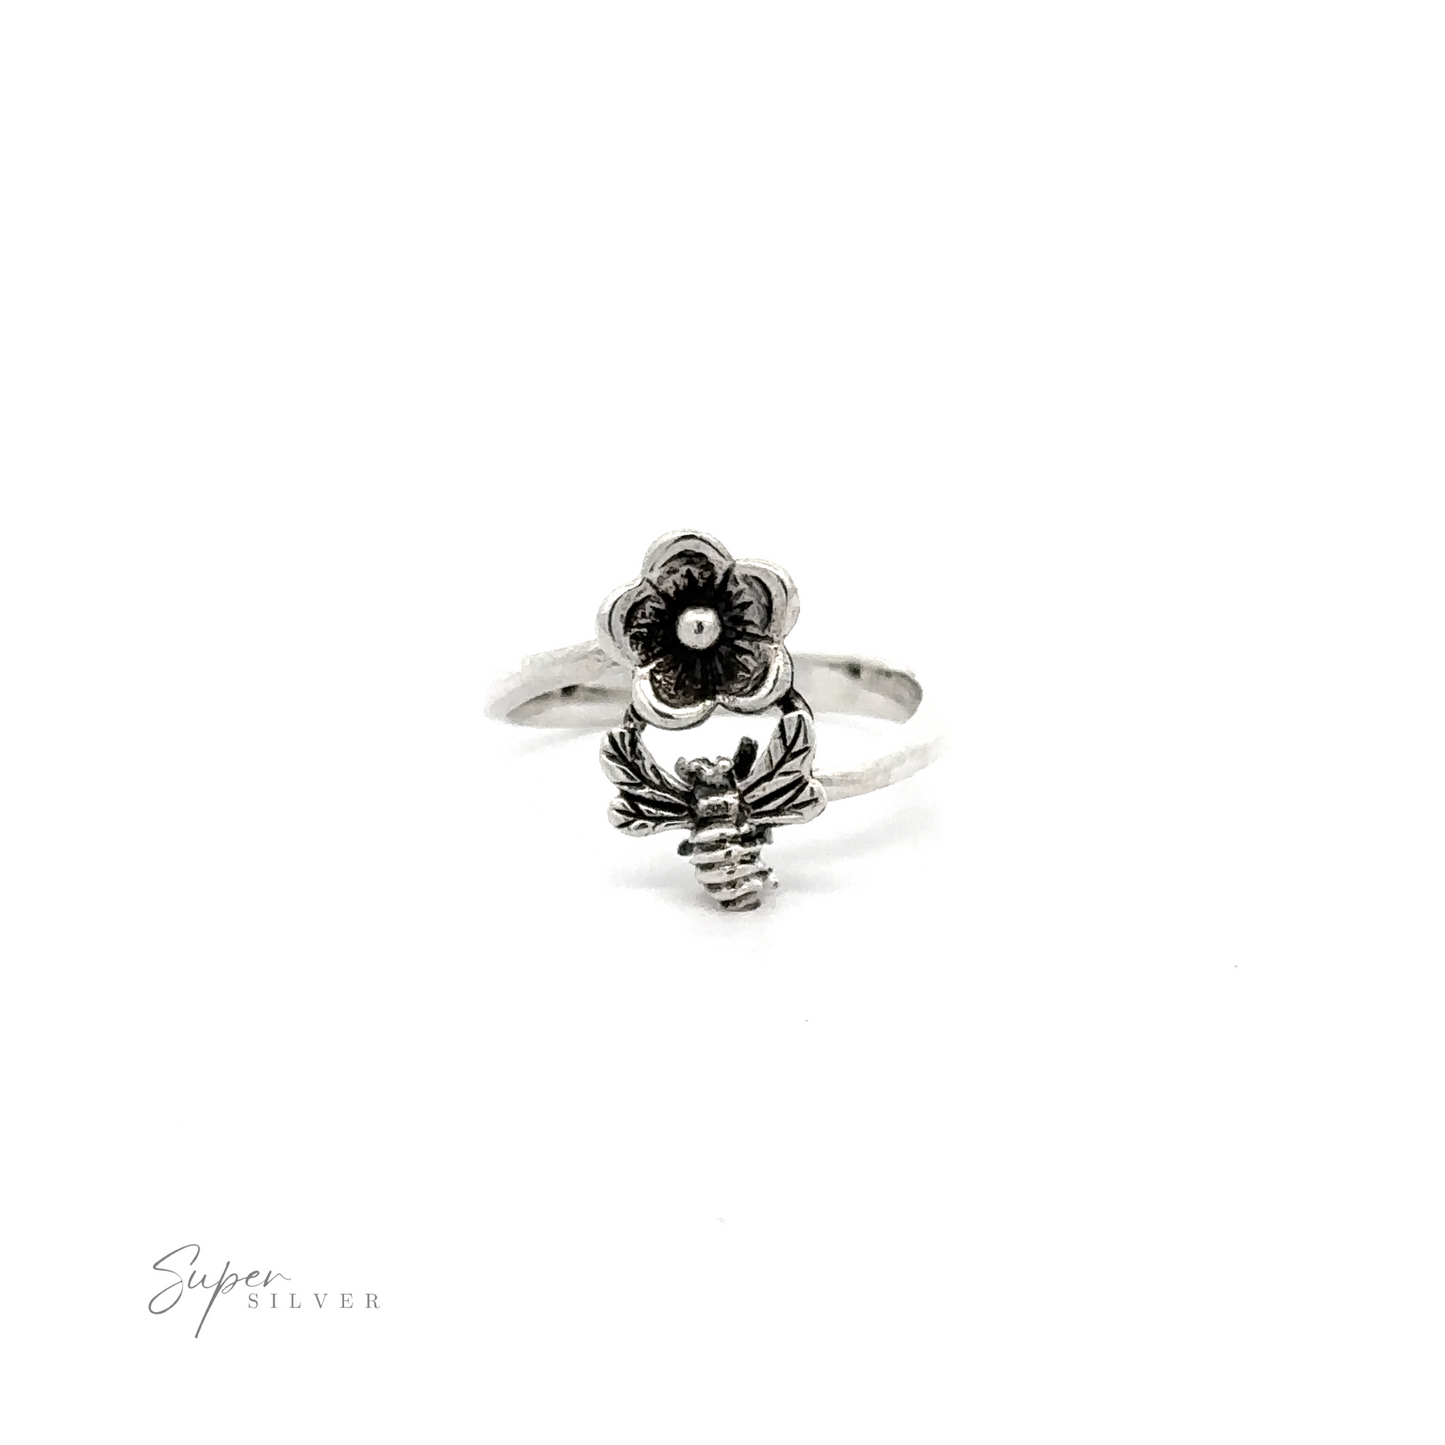 A Silver Bee and Flower Ring, perfect for nature lovers.